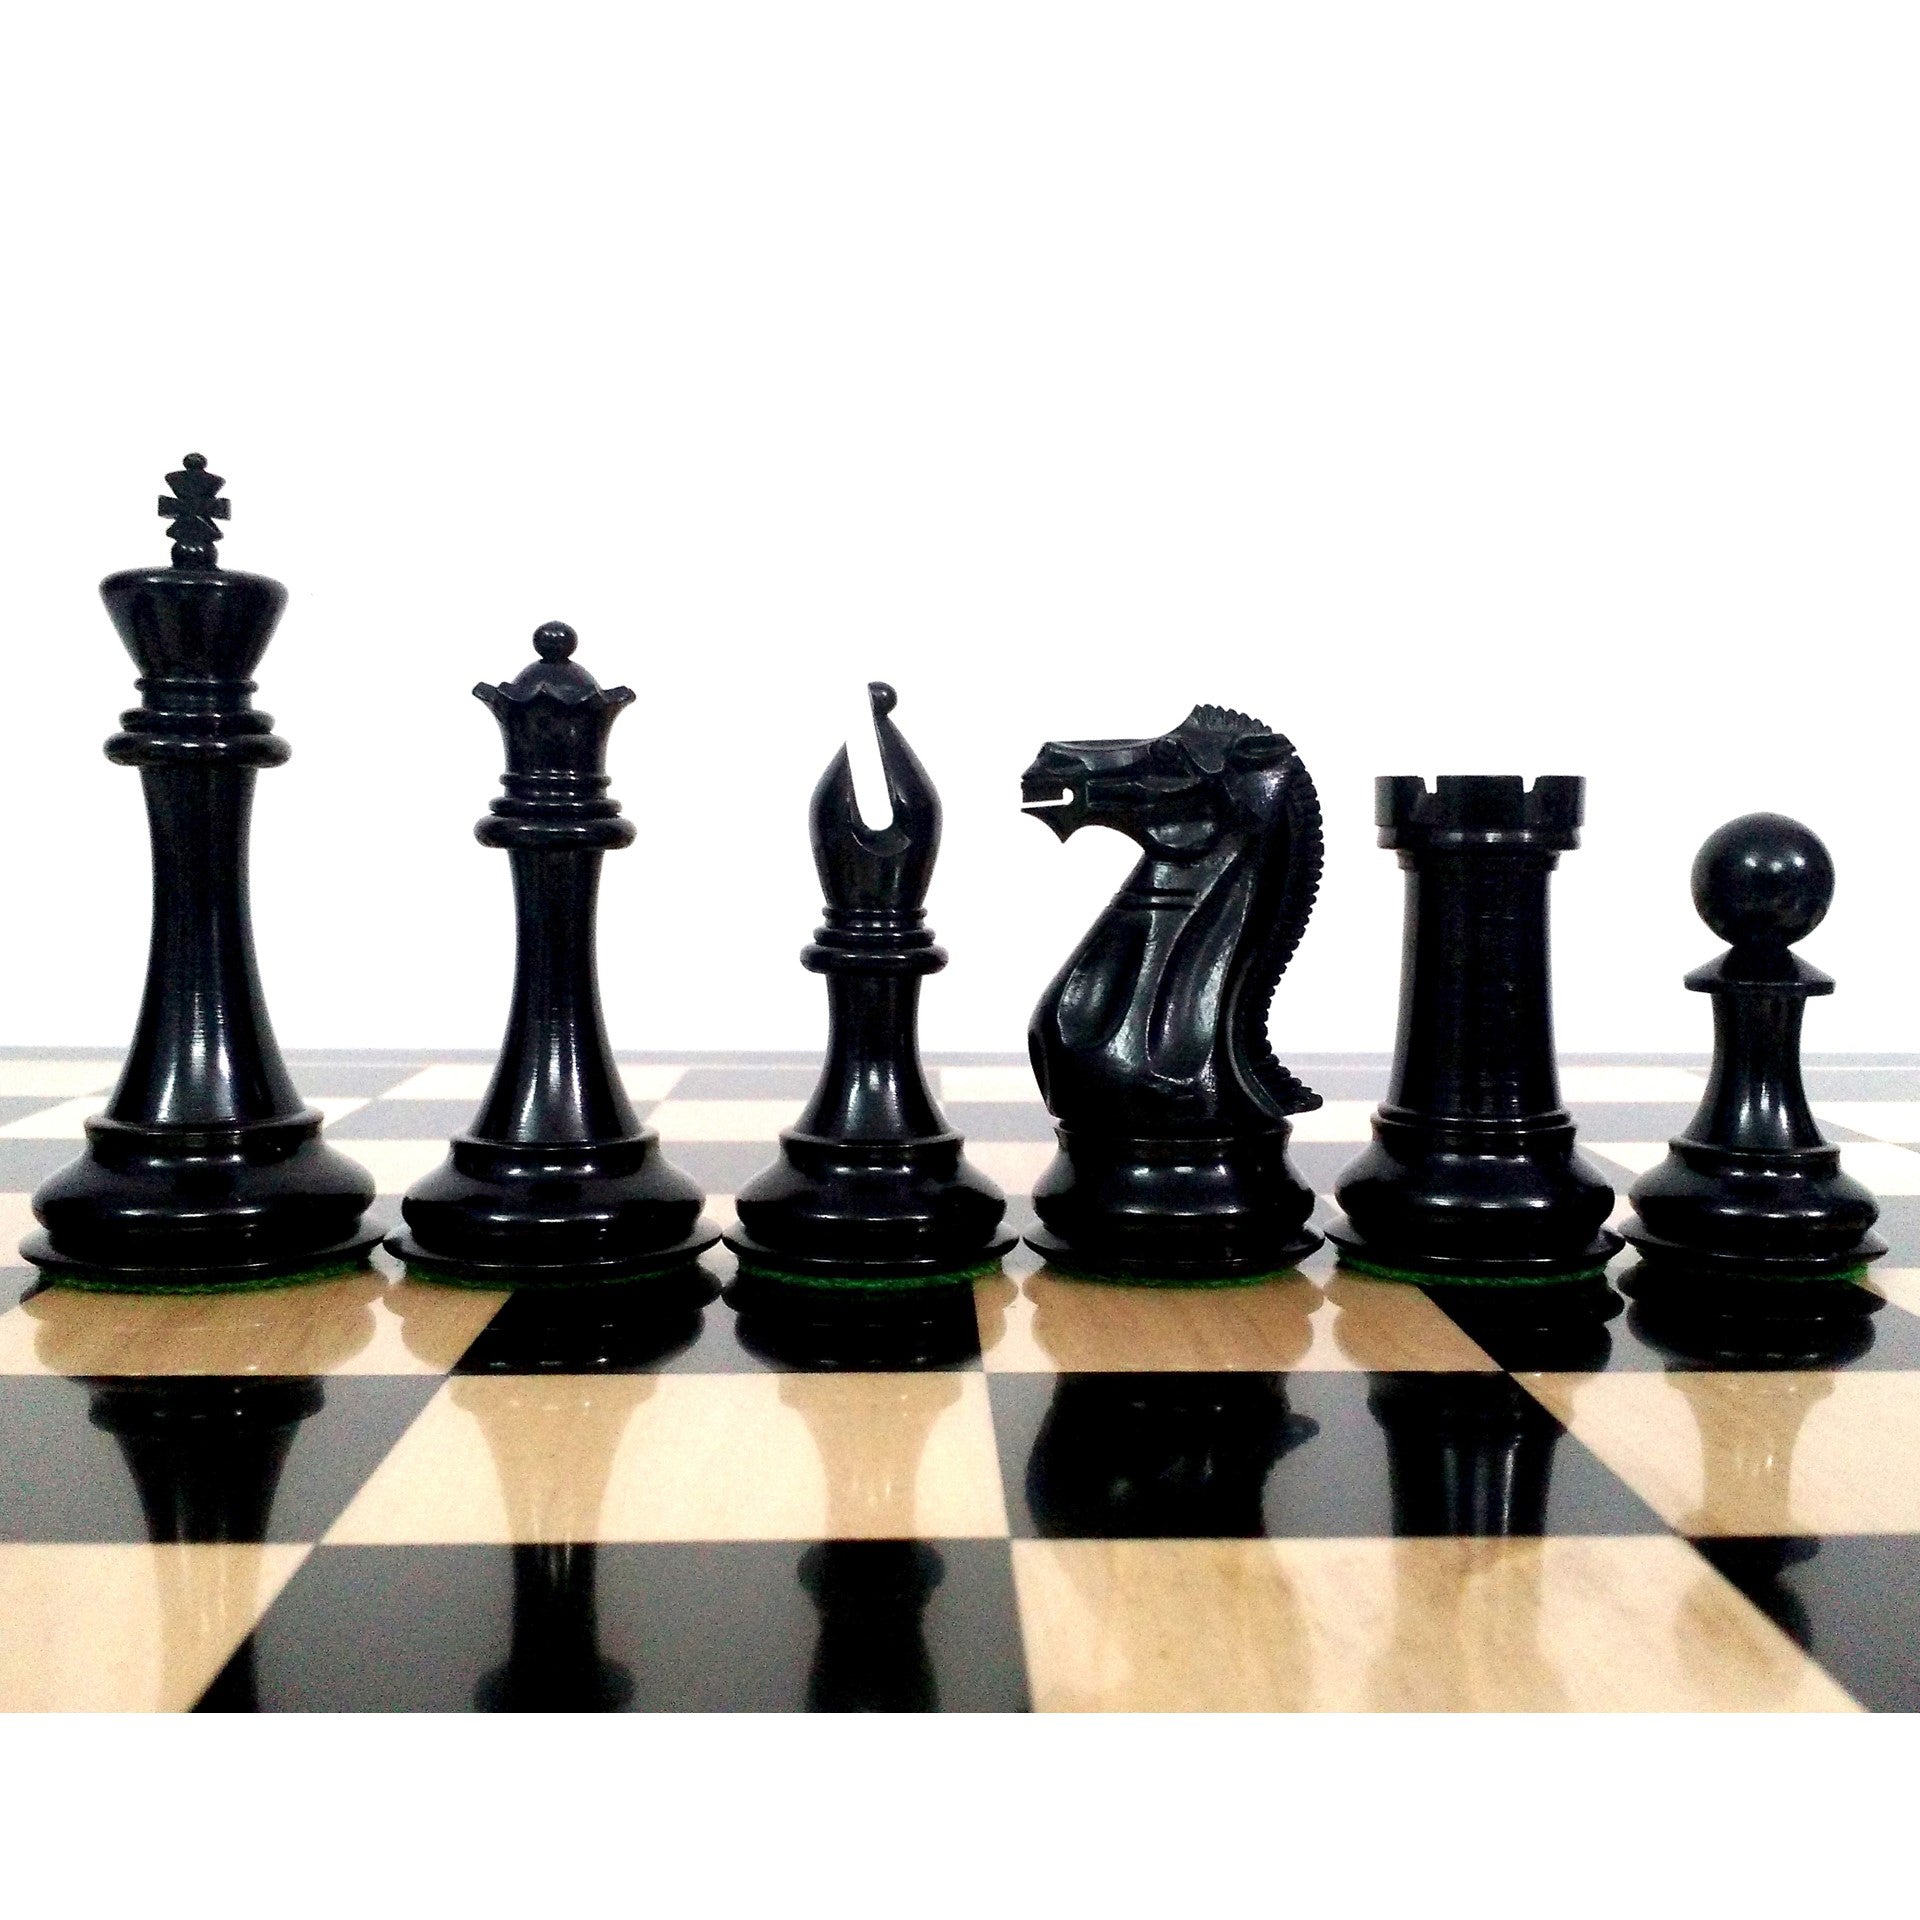 Combo of Sleek Staunton Luxury Chess Set - Pieces in Ebony Wood with Board and Box